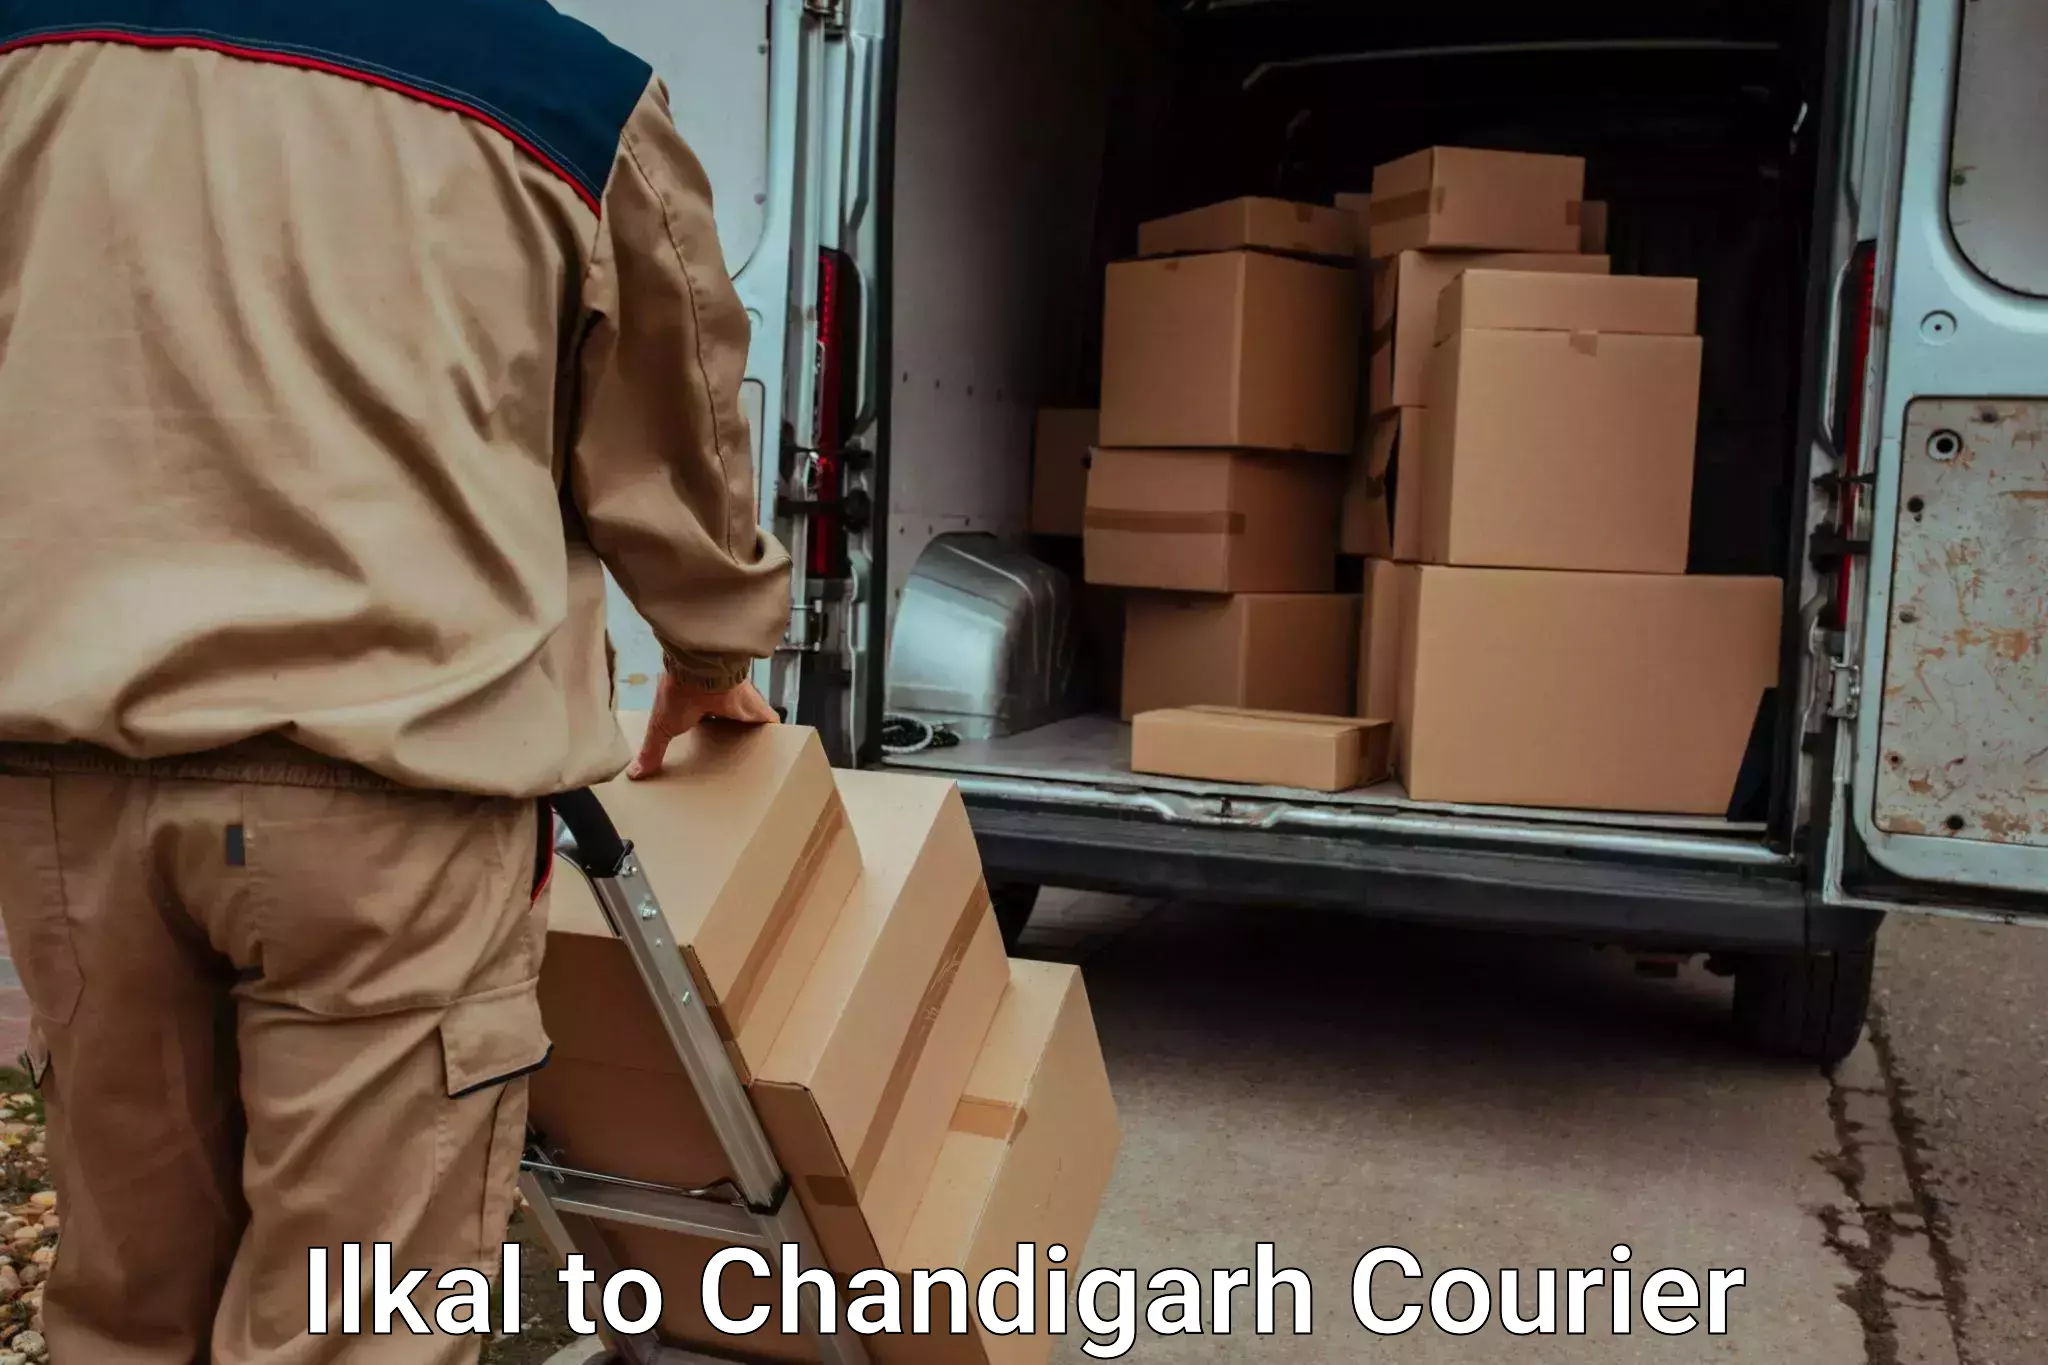 Emergency baggage service Ilkal to Chandigarh